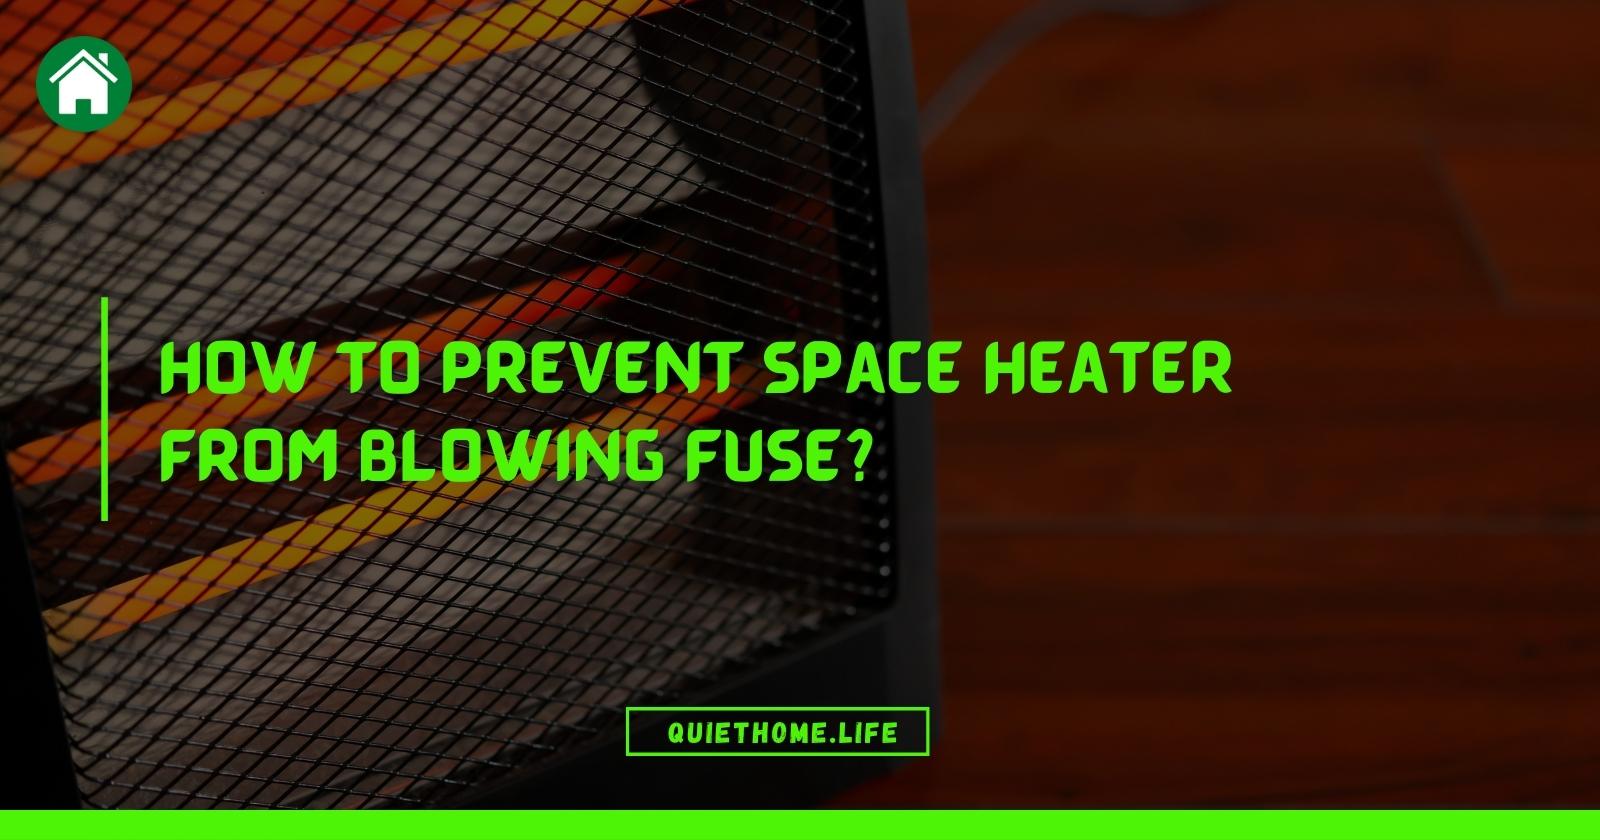 How to Prevent Space Heater from Blowing fuse